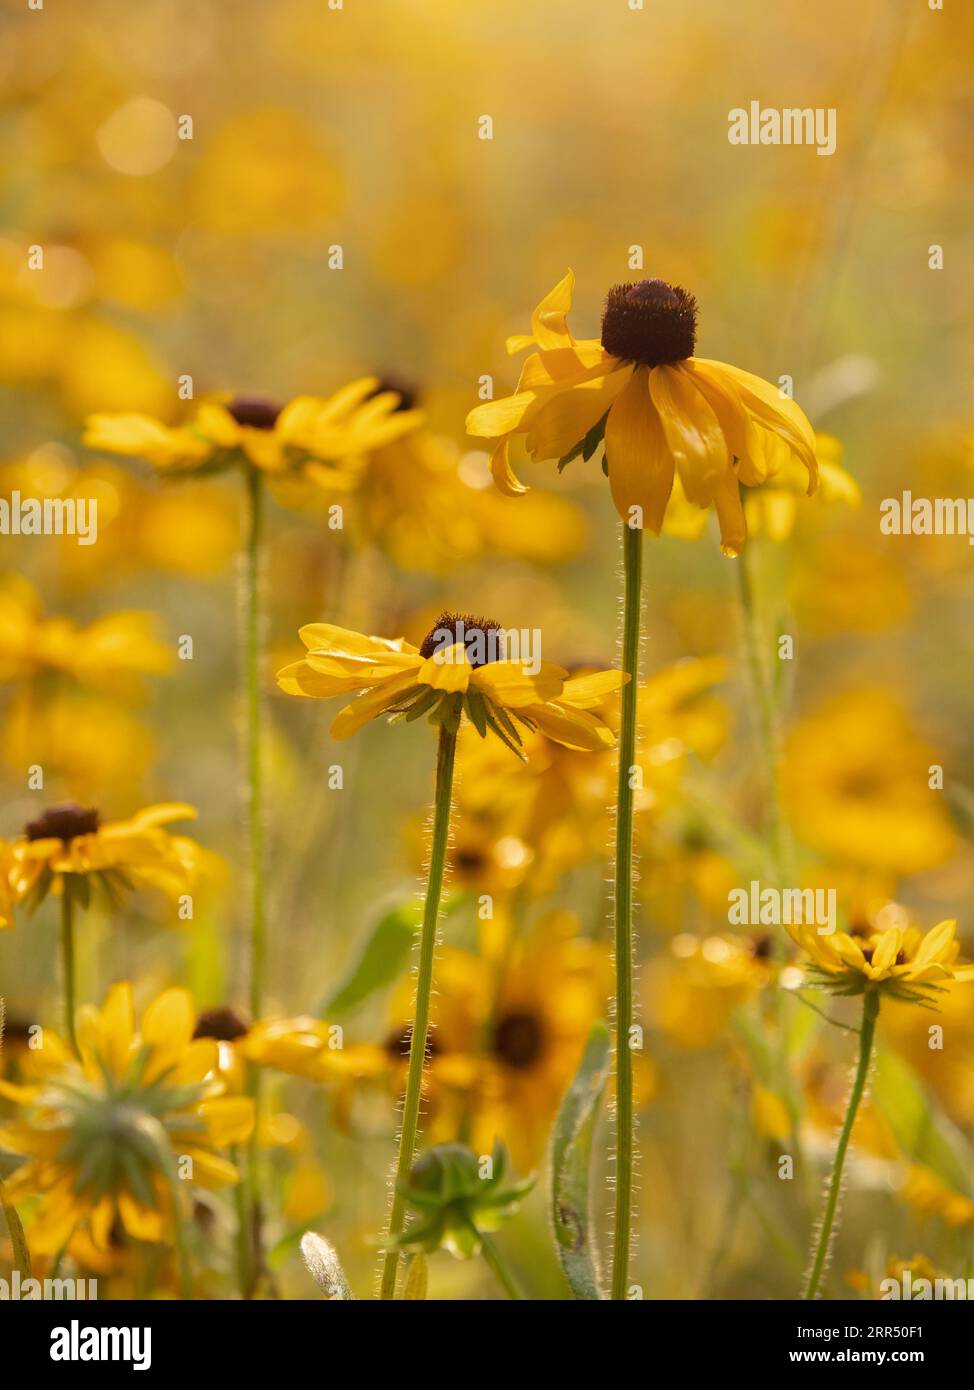 Black-eyed susan flowers grow wild in a meadow. Stock Photo